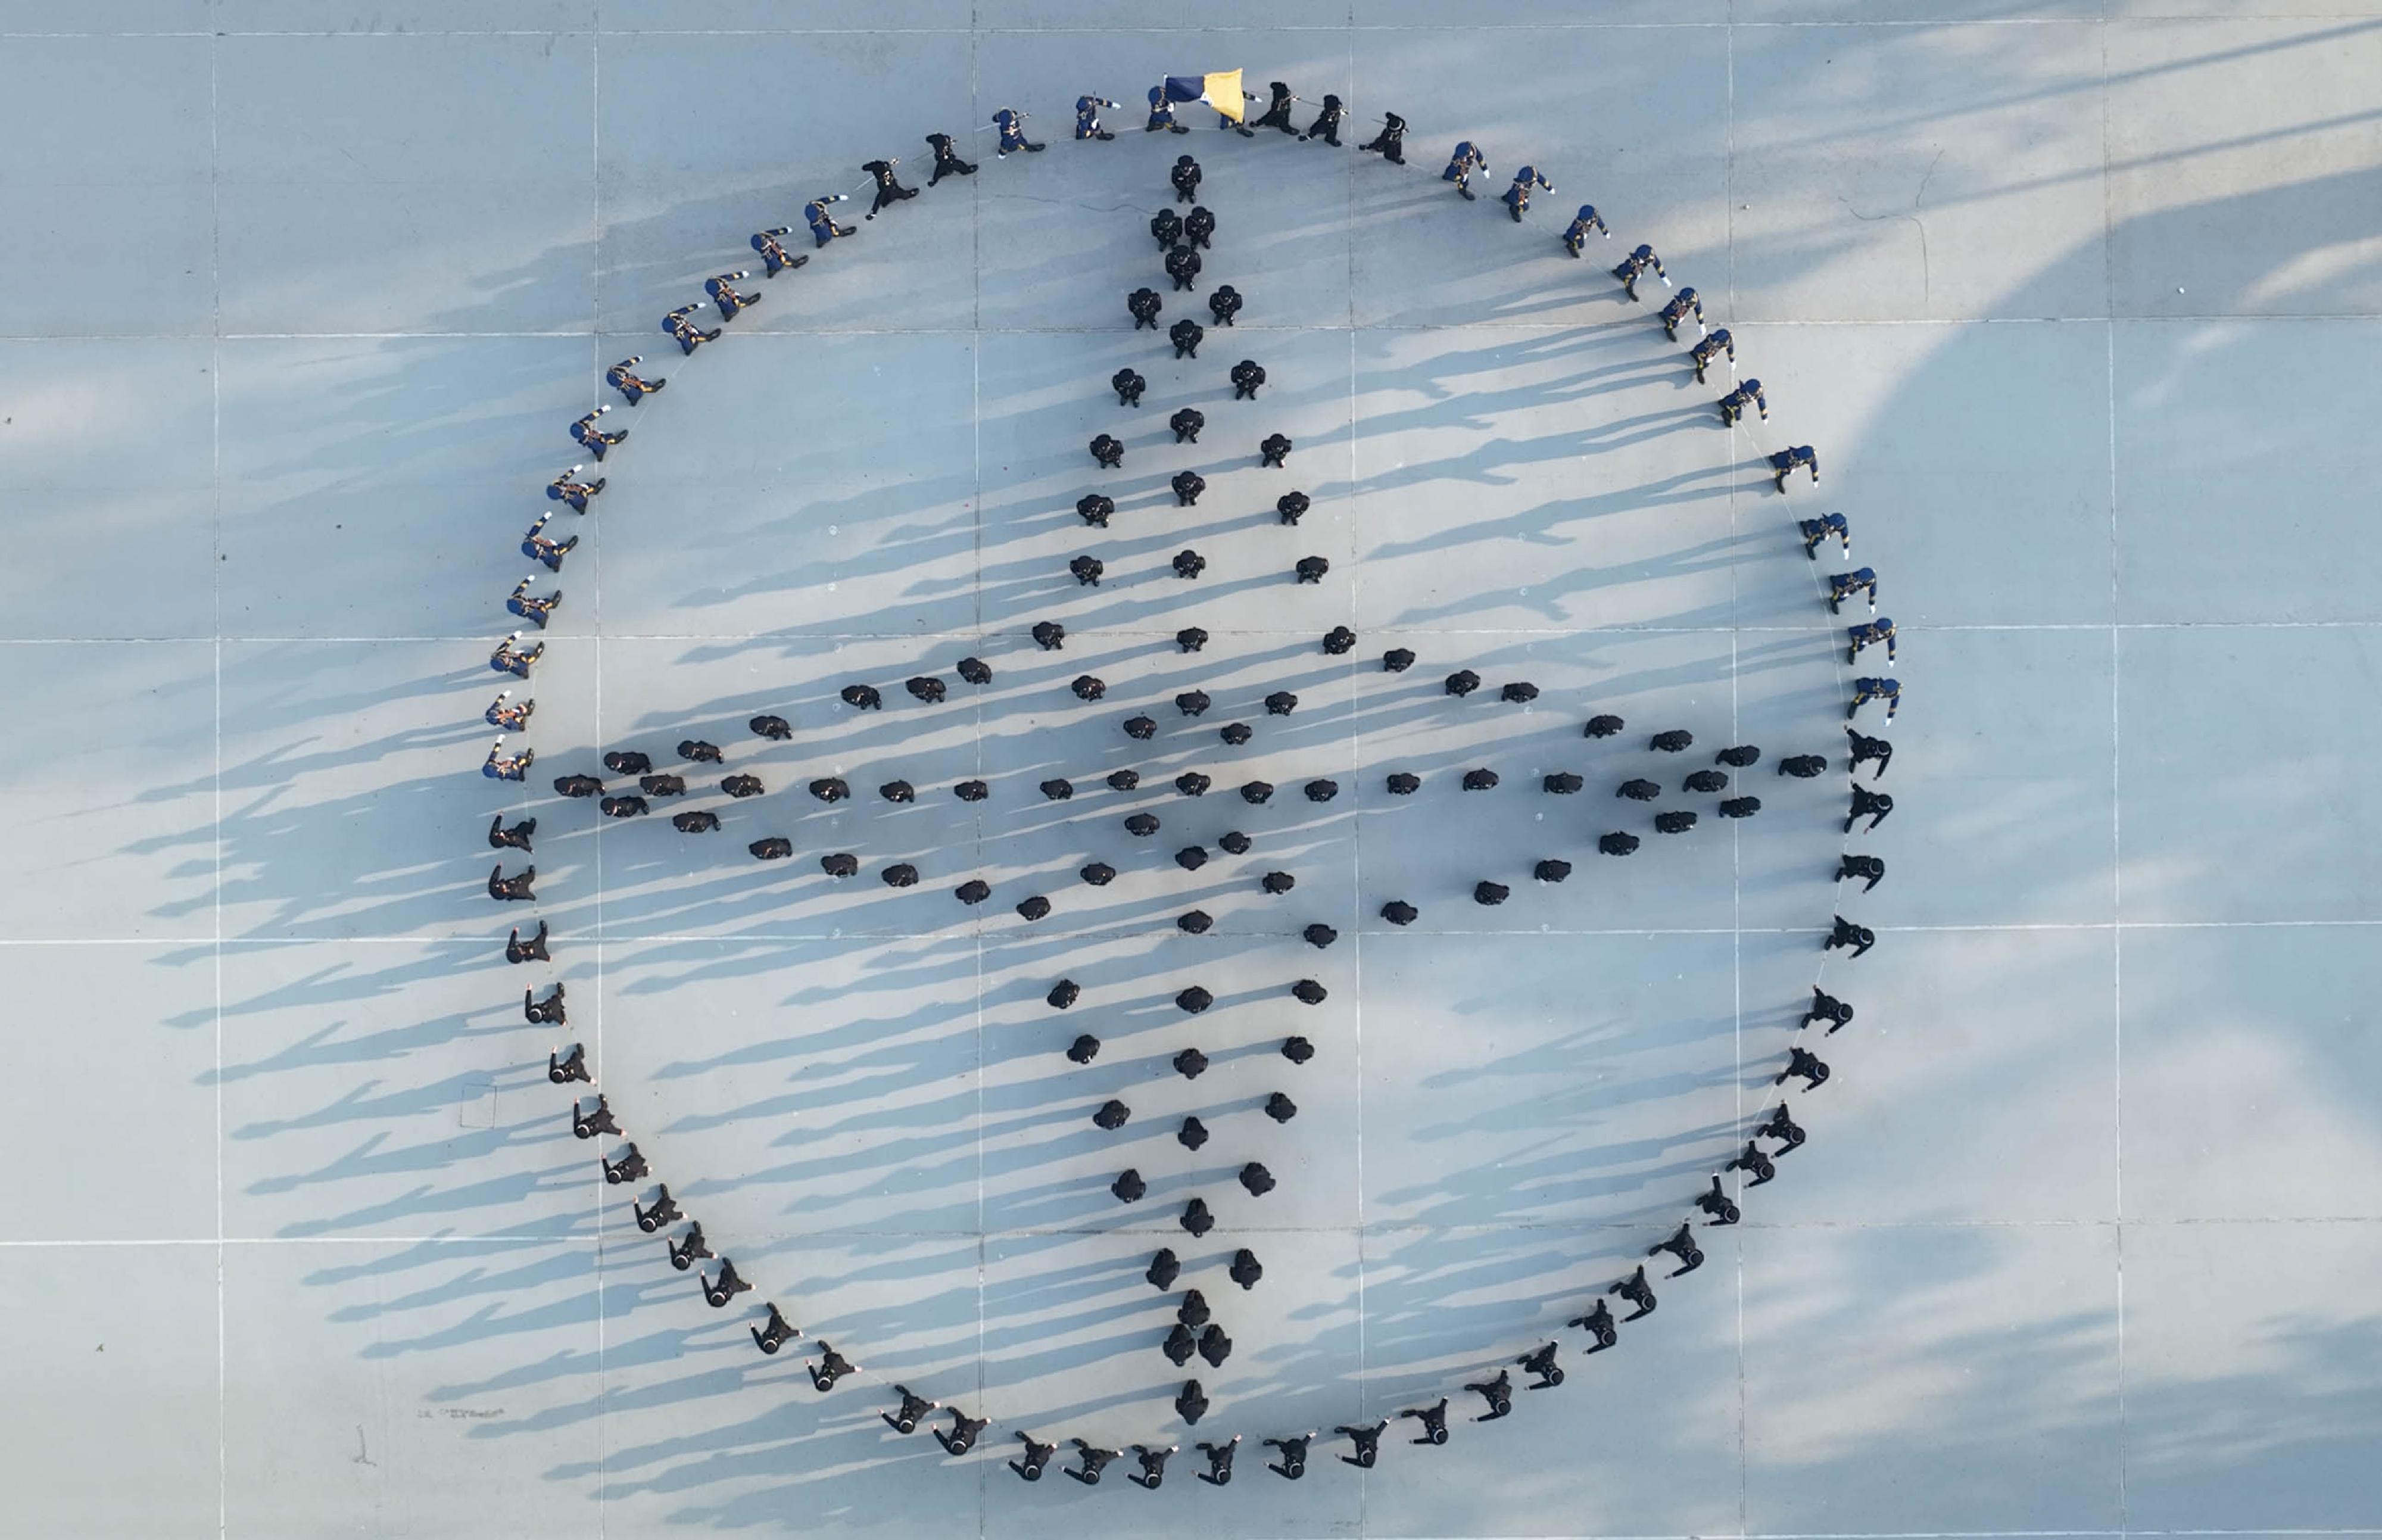 The Correctional Services Department held a passing-out parade at the Hong Kong Correctional Services Academy today (November 24). Photo shows passing-out correctional officers assembling to form the compass of the departmental crest during a foot drill demonstration, symbolising that they have clear goals and direction in serving the country and Hong Kong.